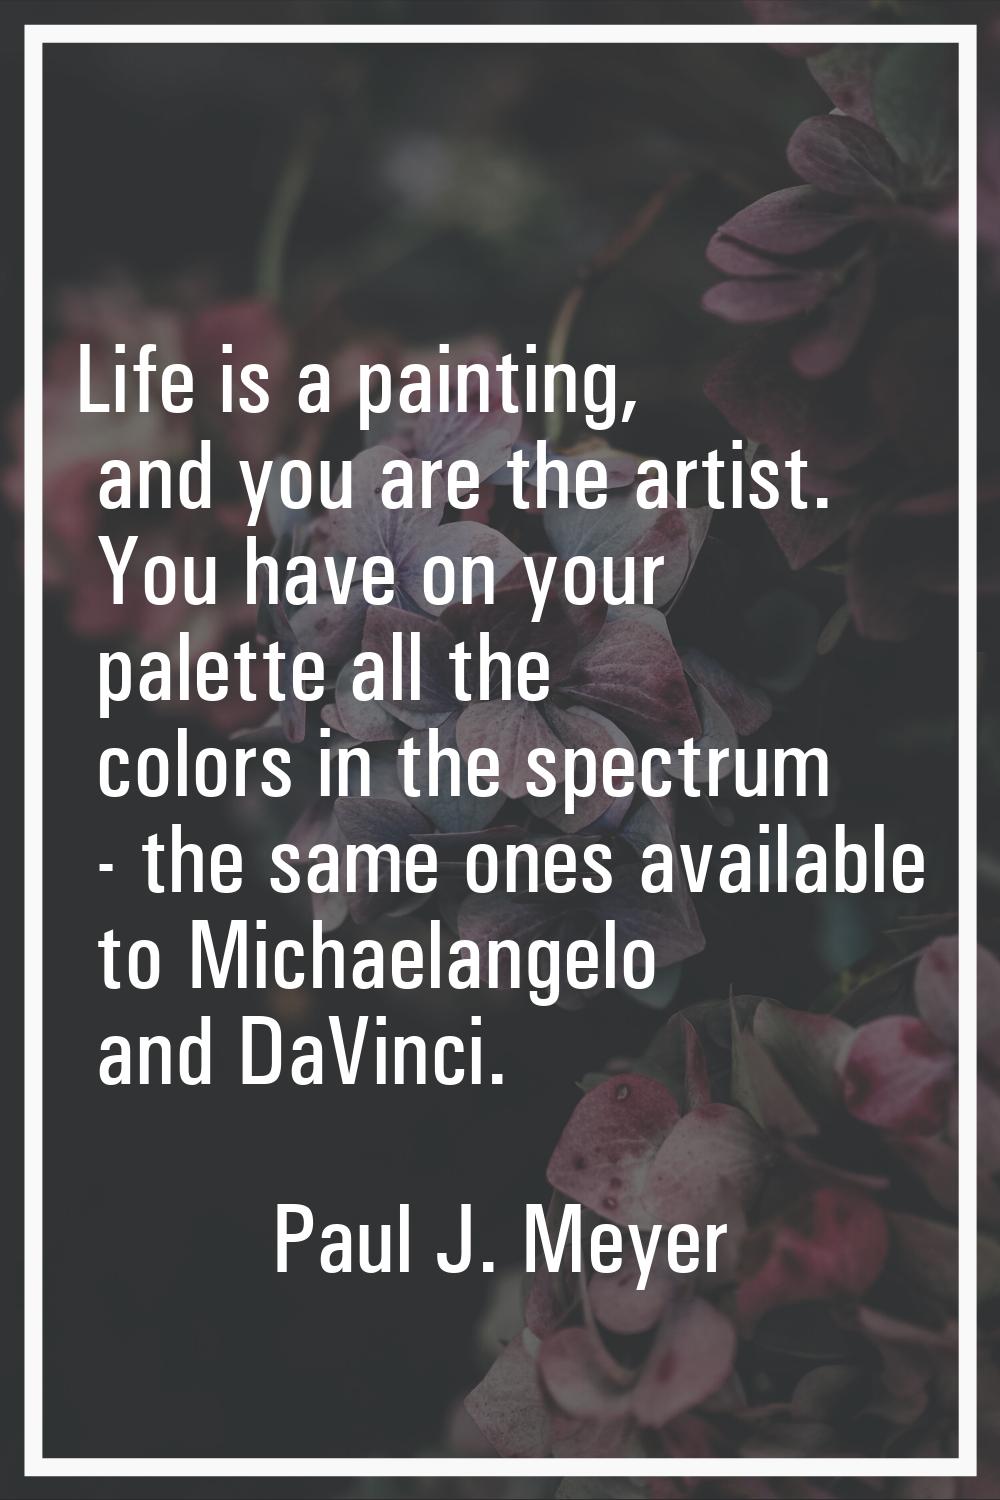 Life is a painting, and you are the artist. You have on your palette all the colors in the spectrum